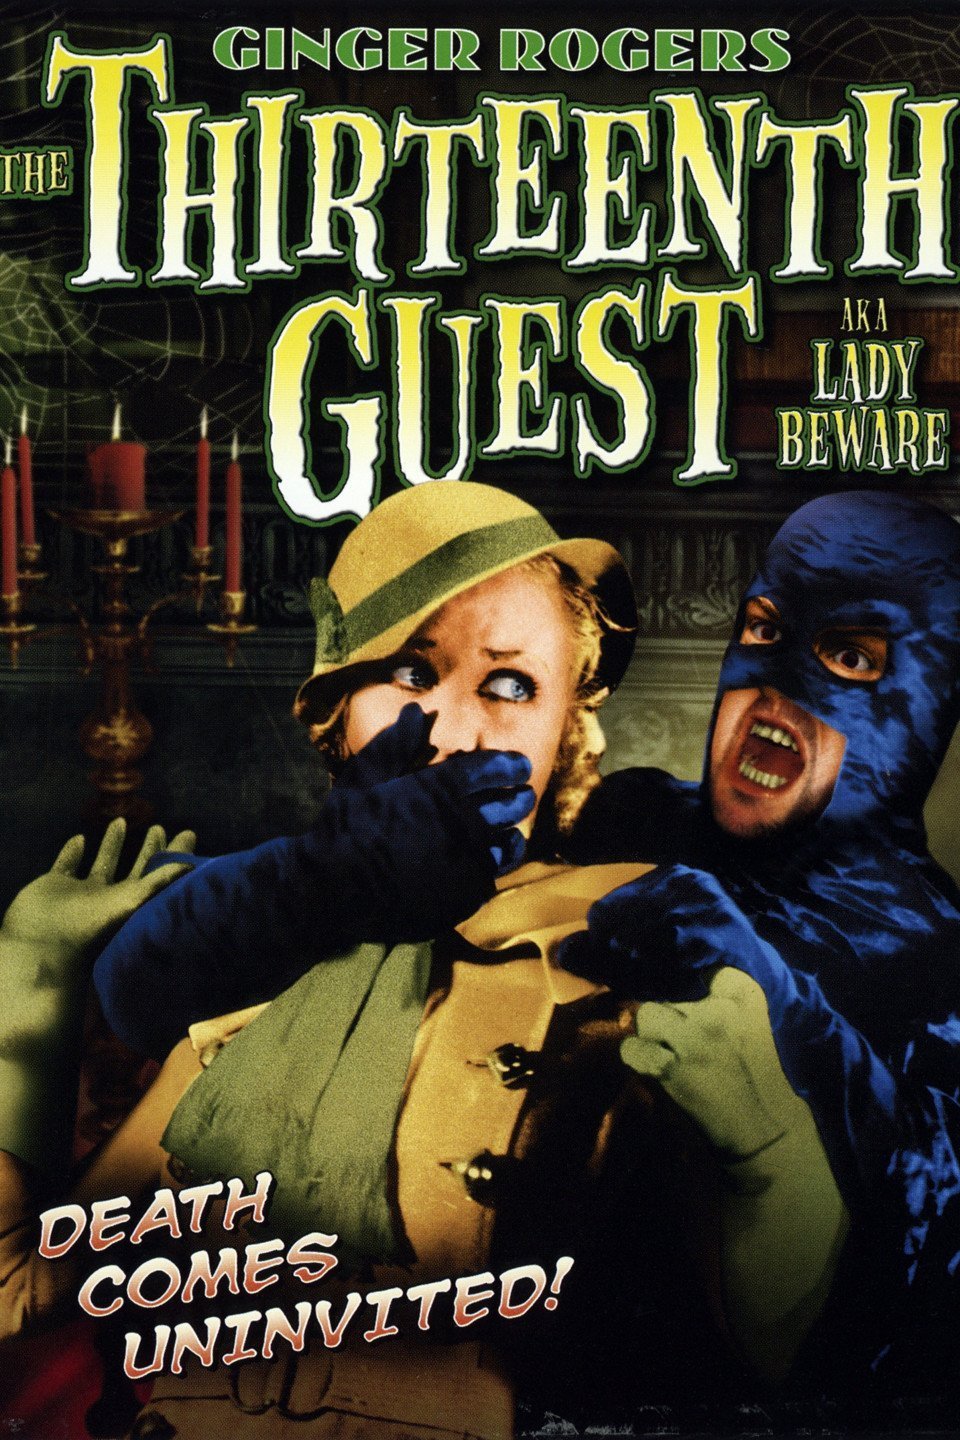 Poster of the movie The Thirteenth Guest